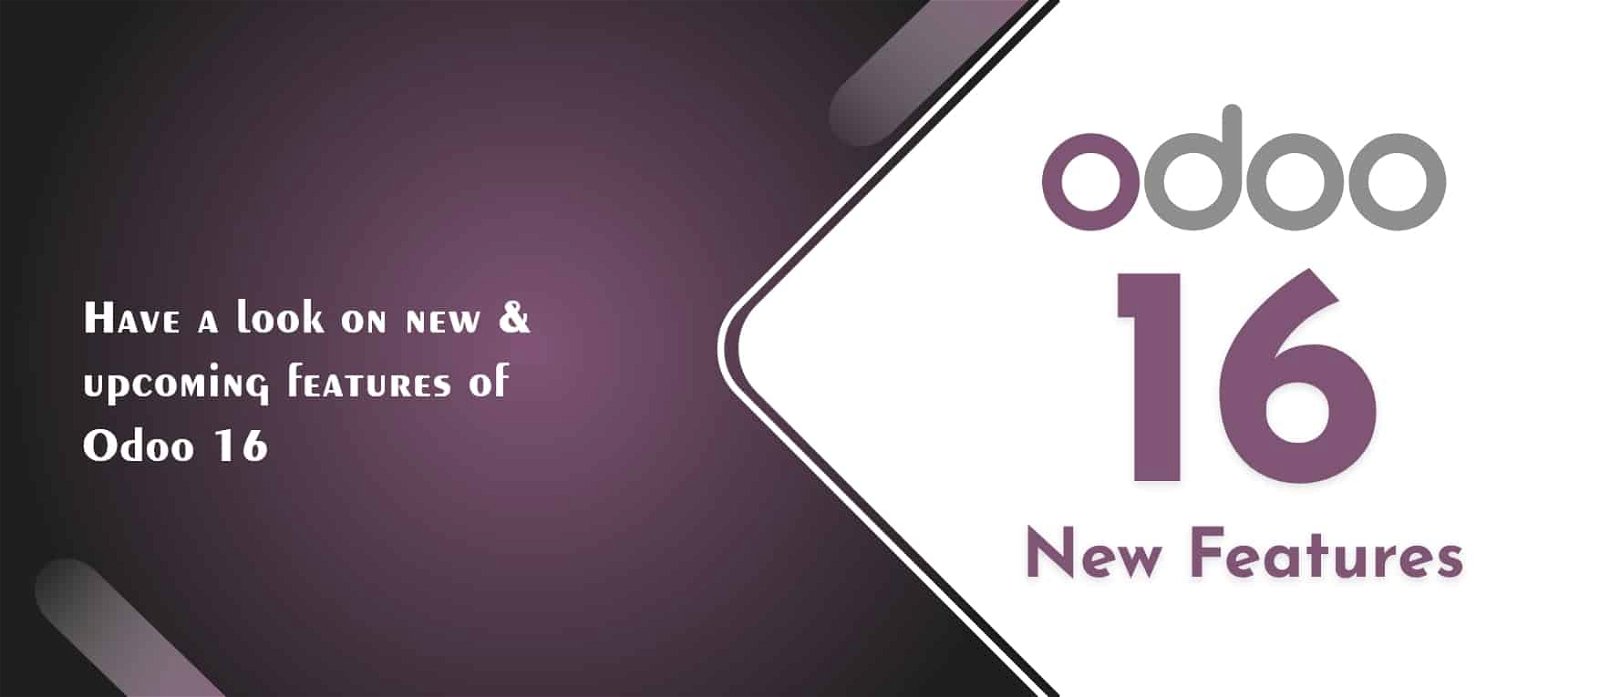 Odoo 16 New Features